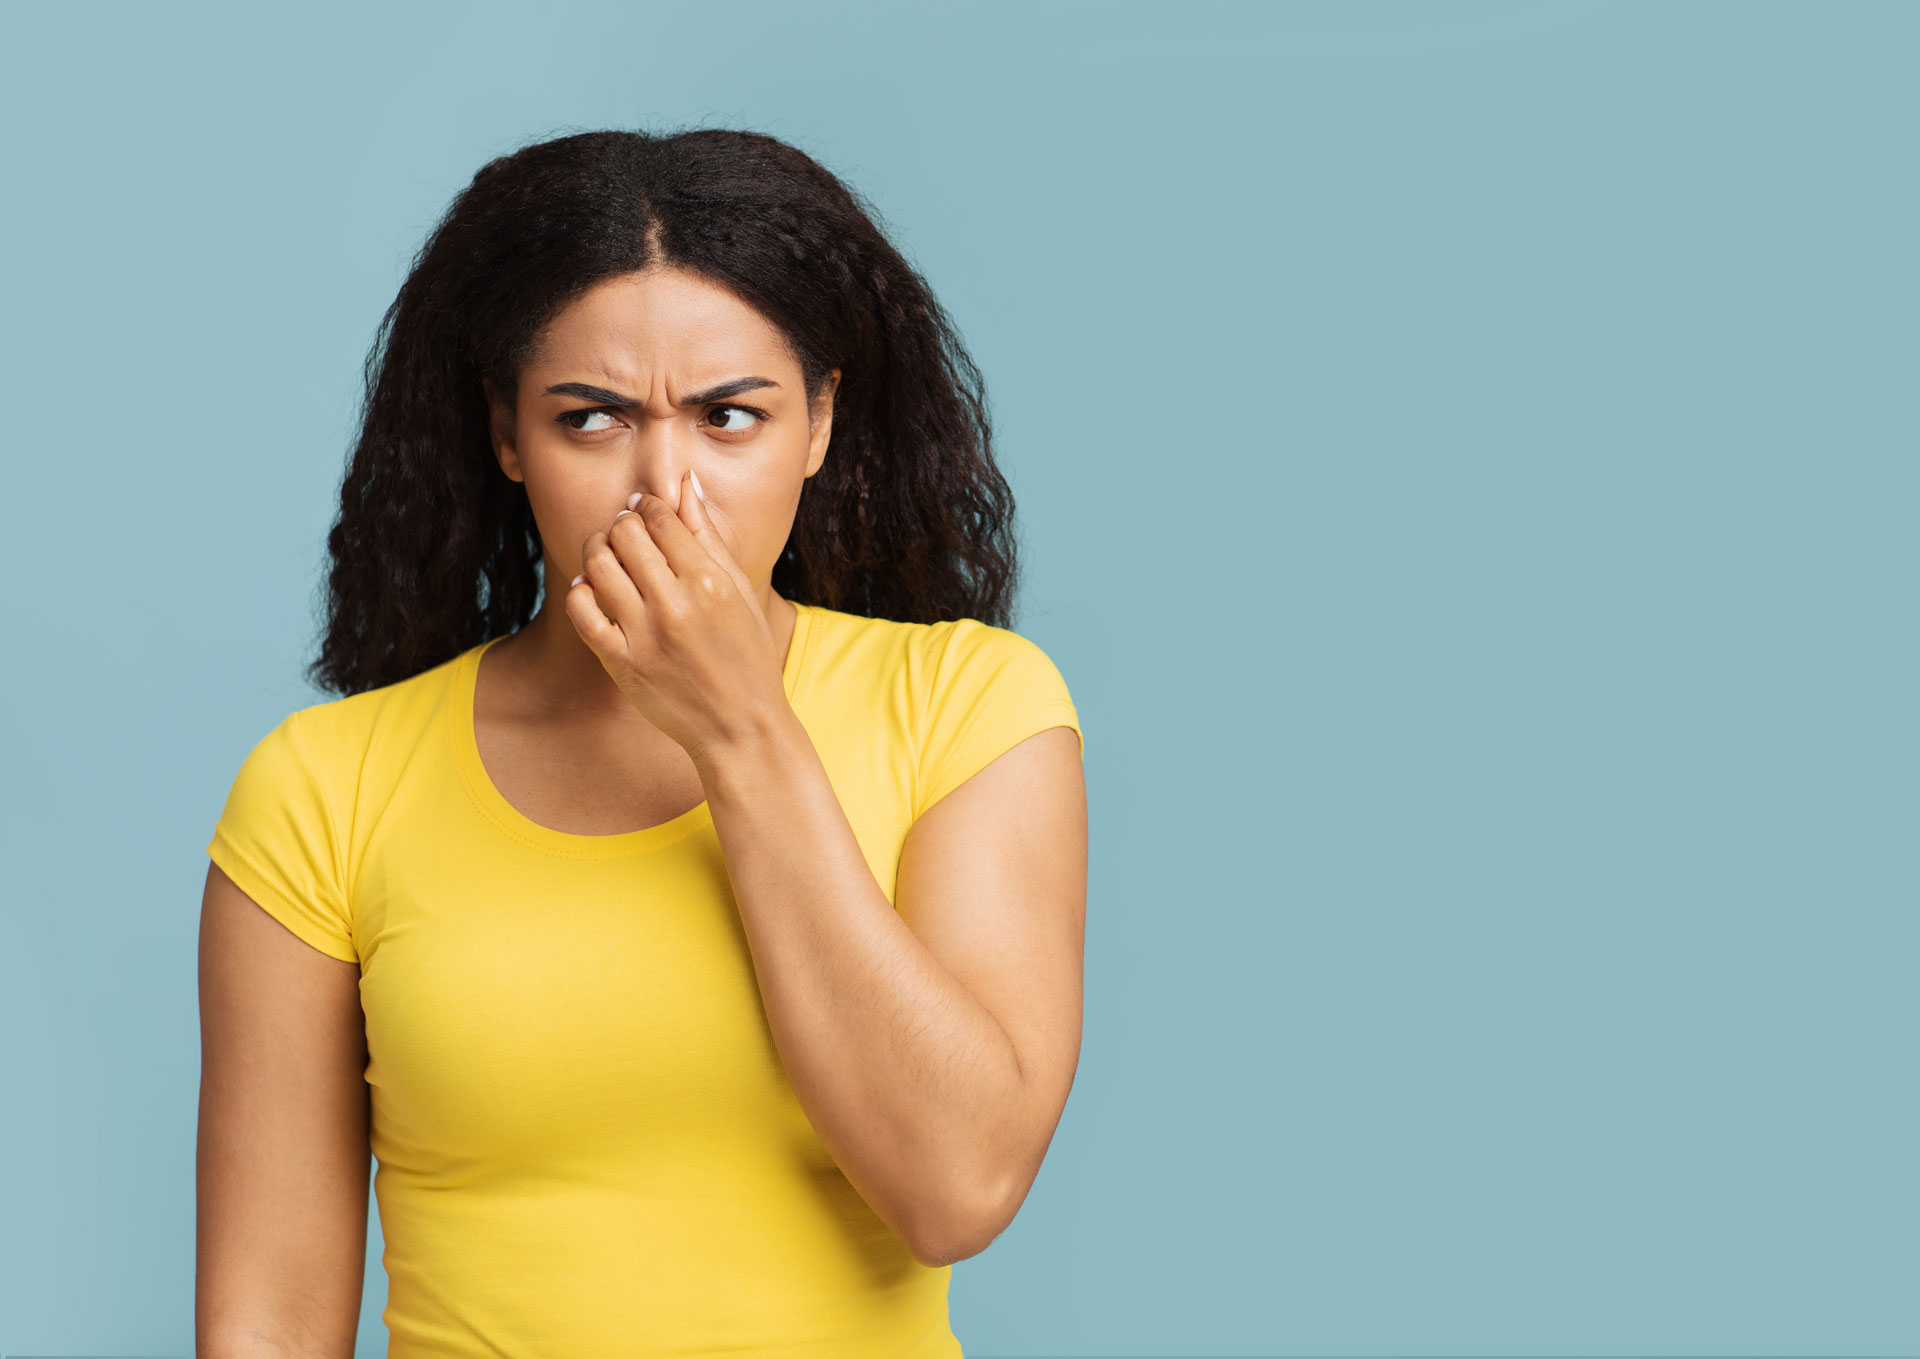 Photo of Woman Pinching Her Nose With Her Fingers